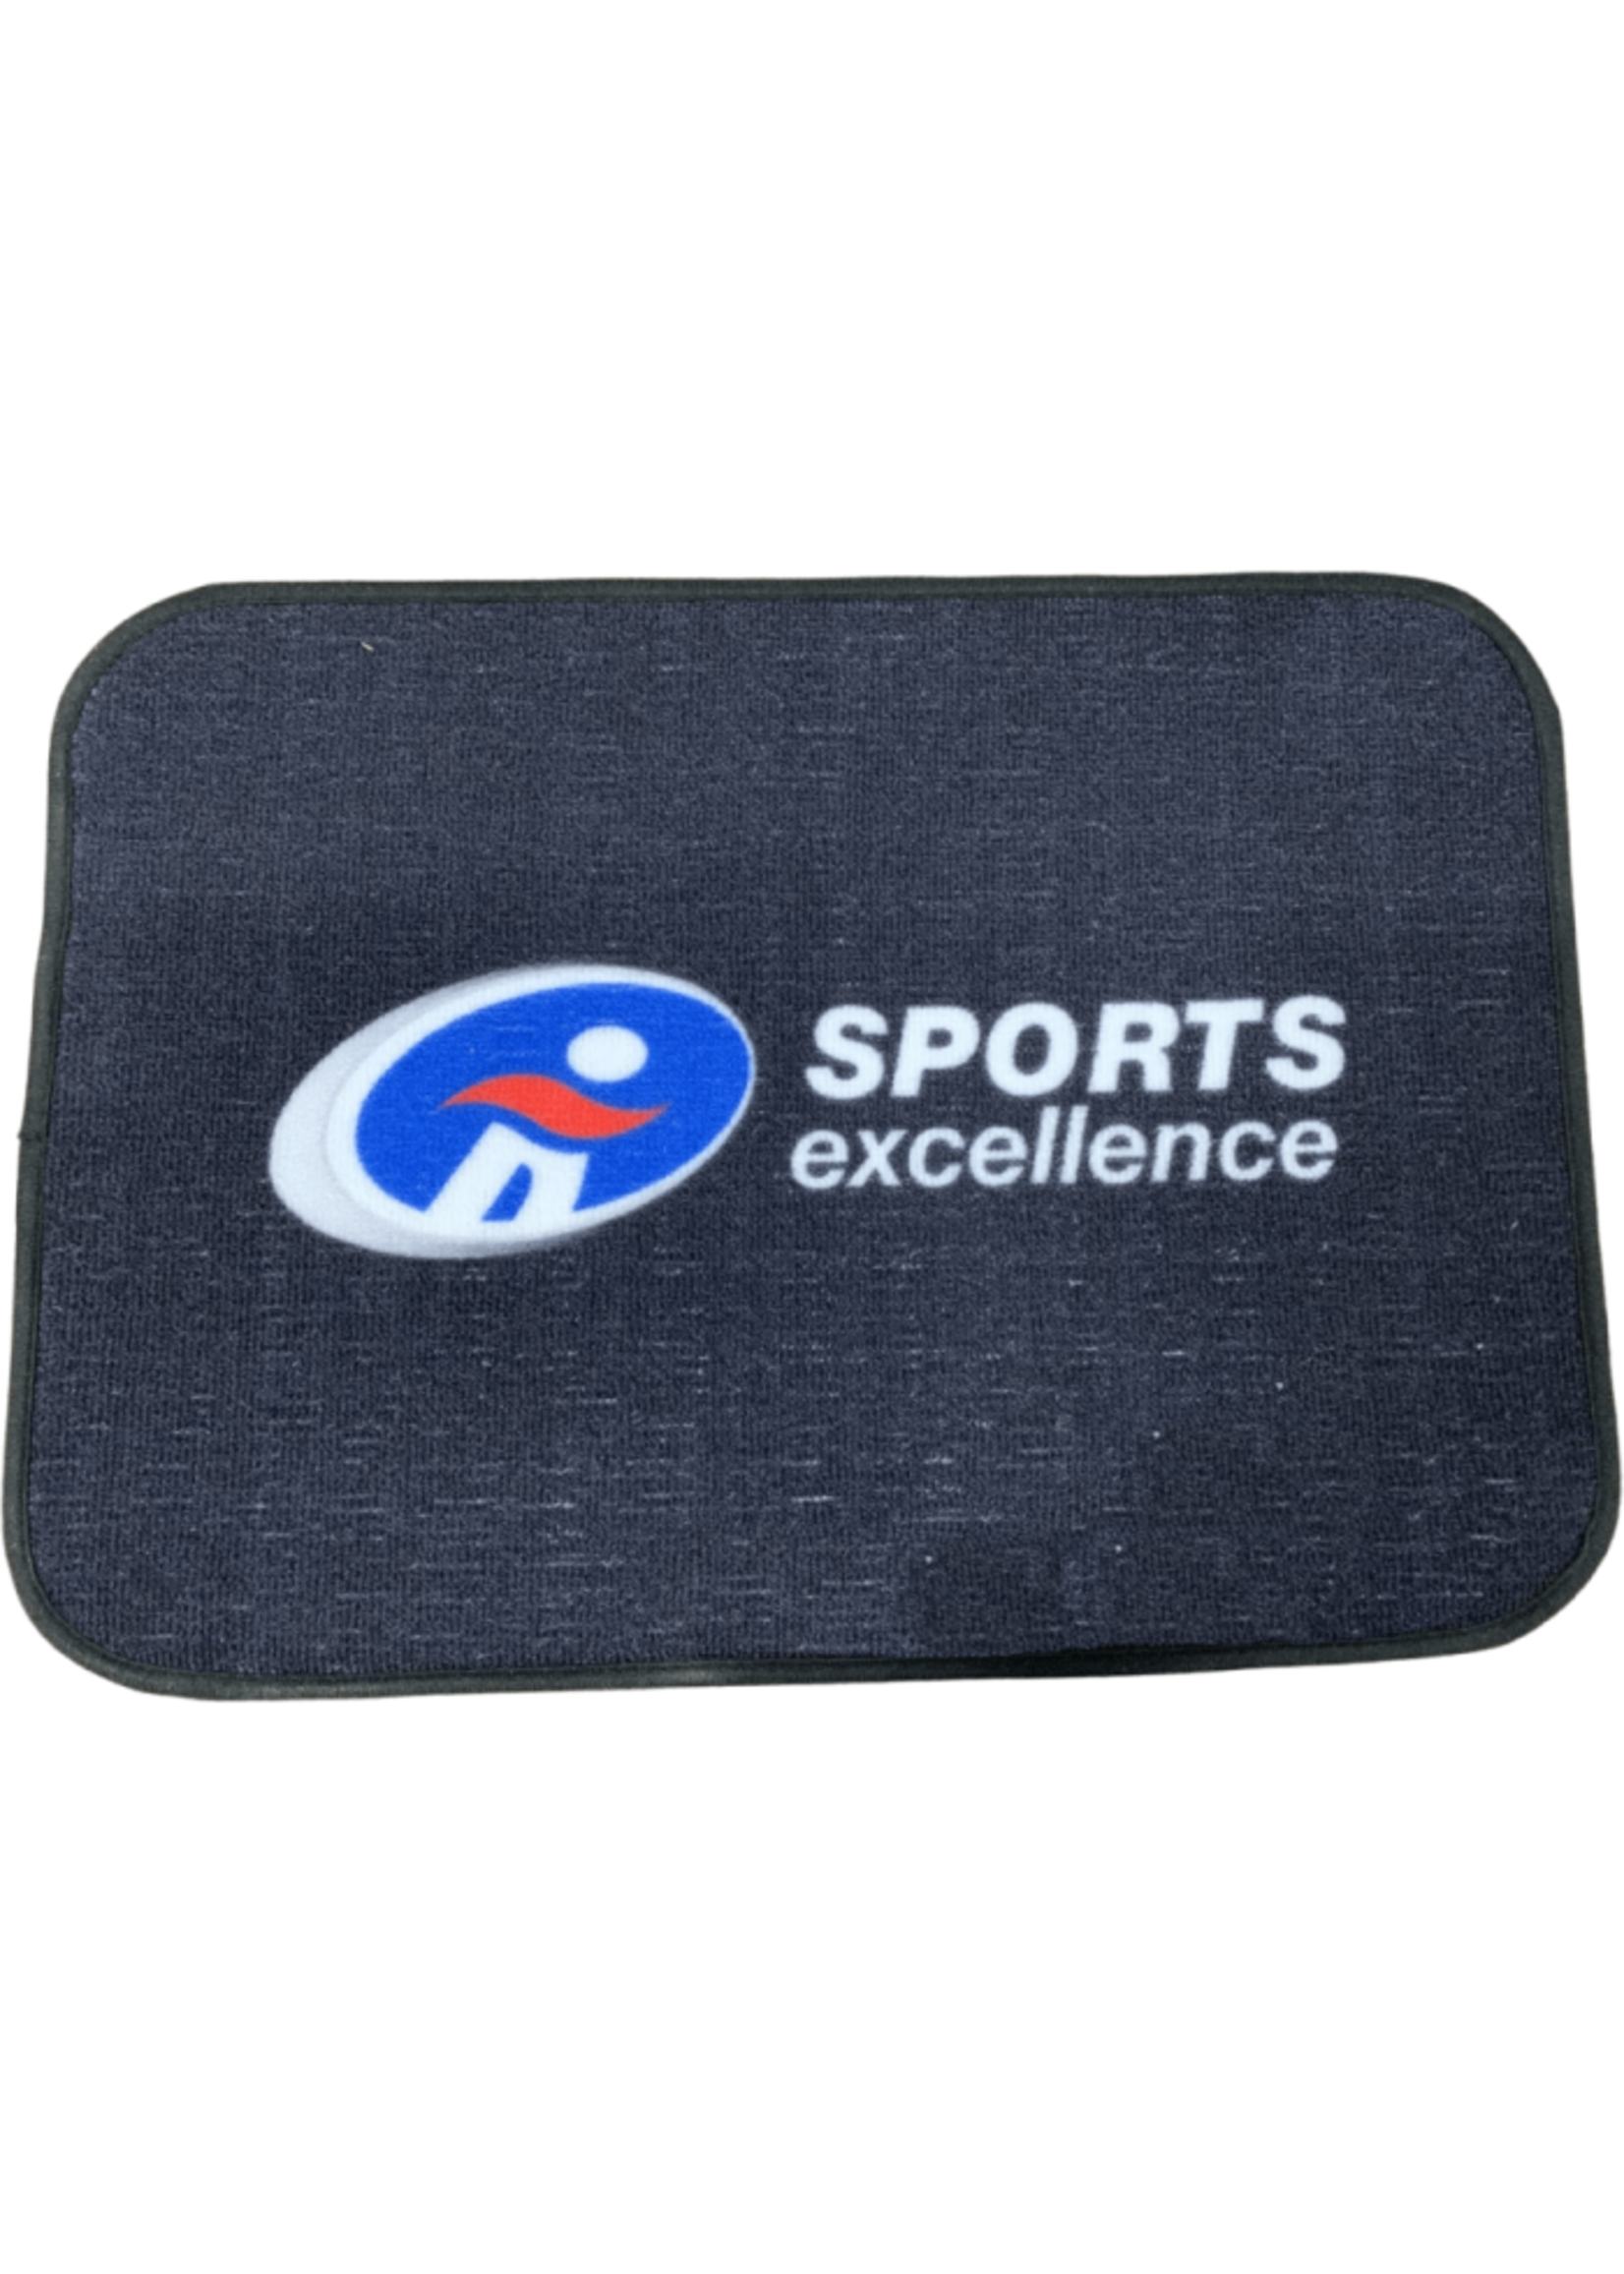 SPORTS EXCELLENCE HOCKEY MATS